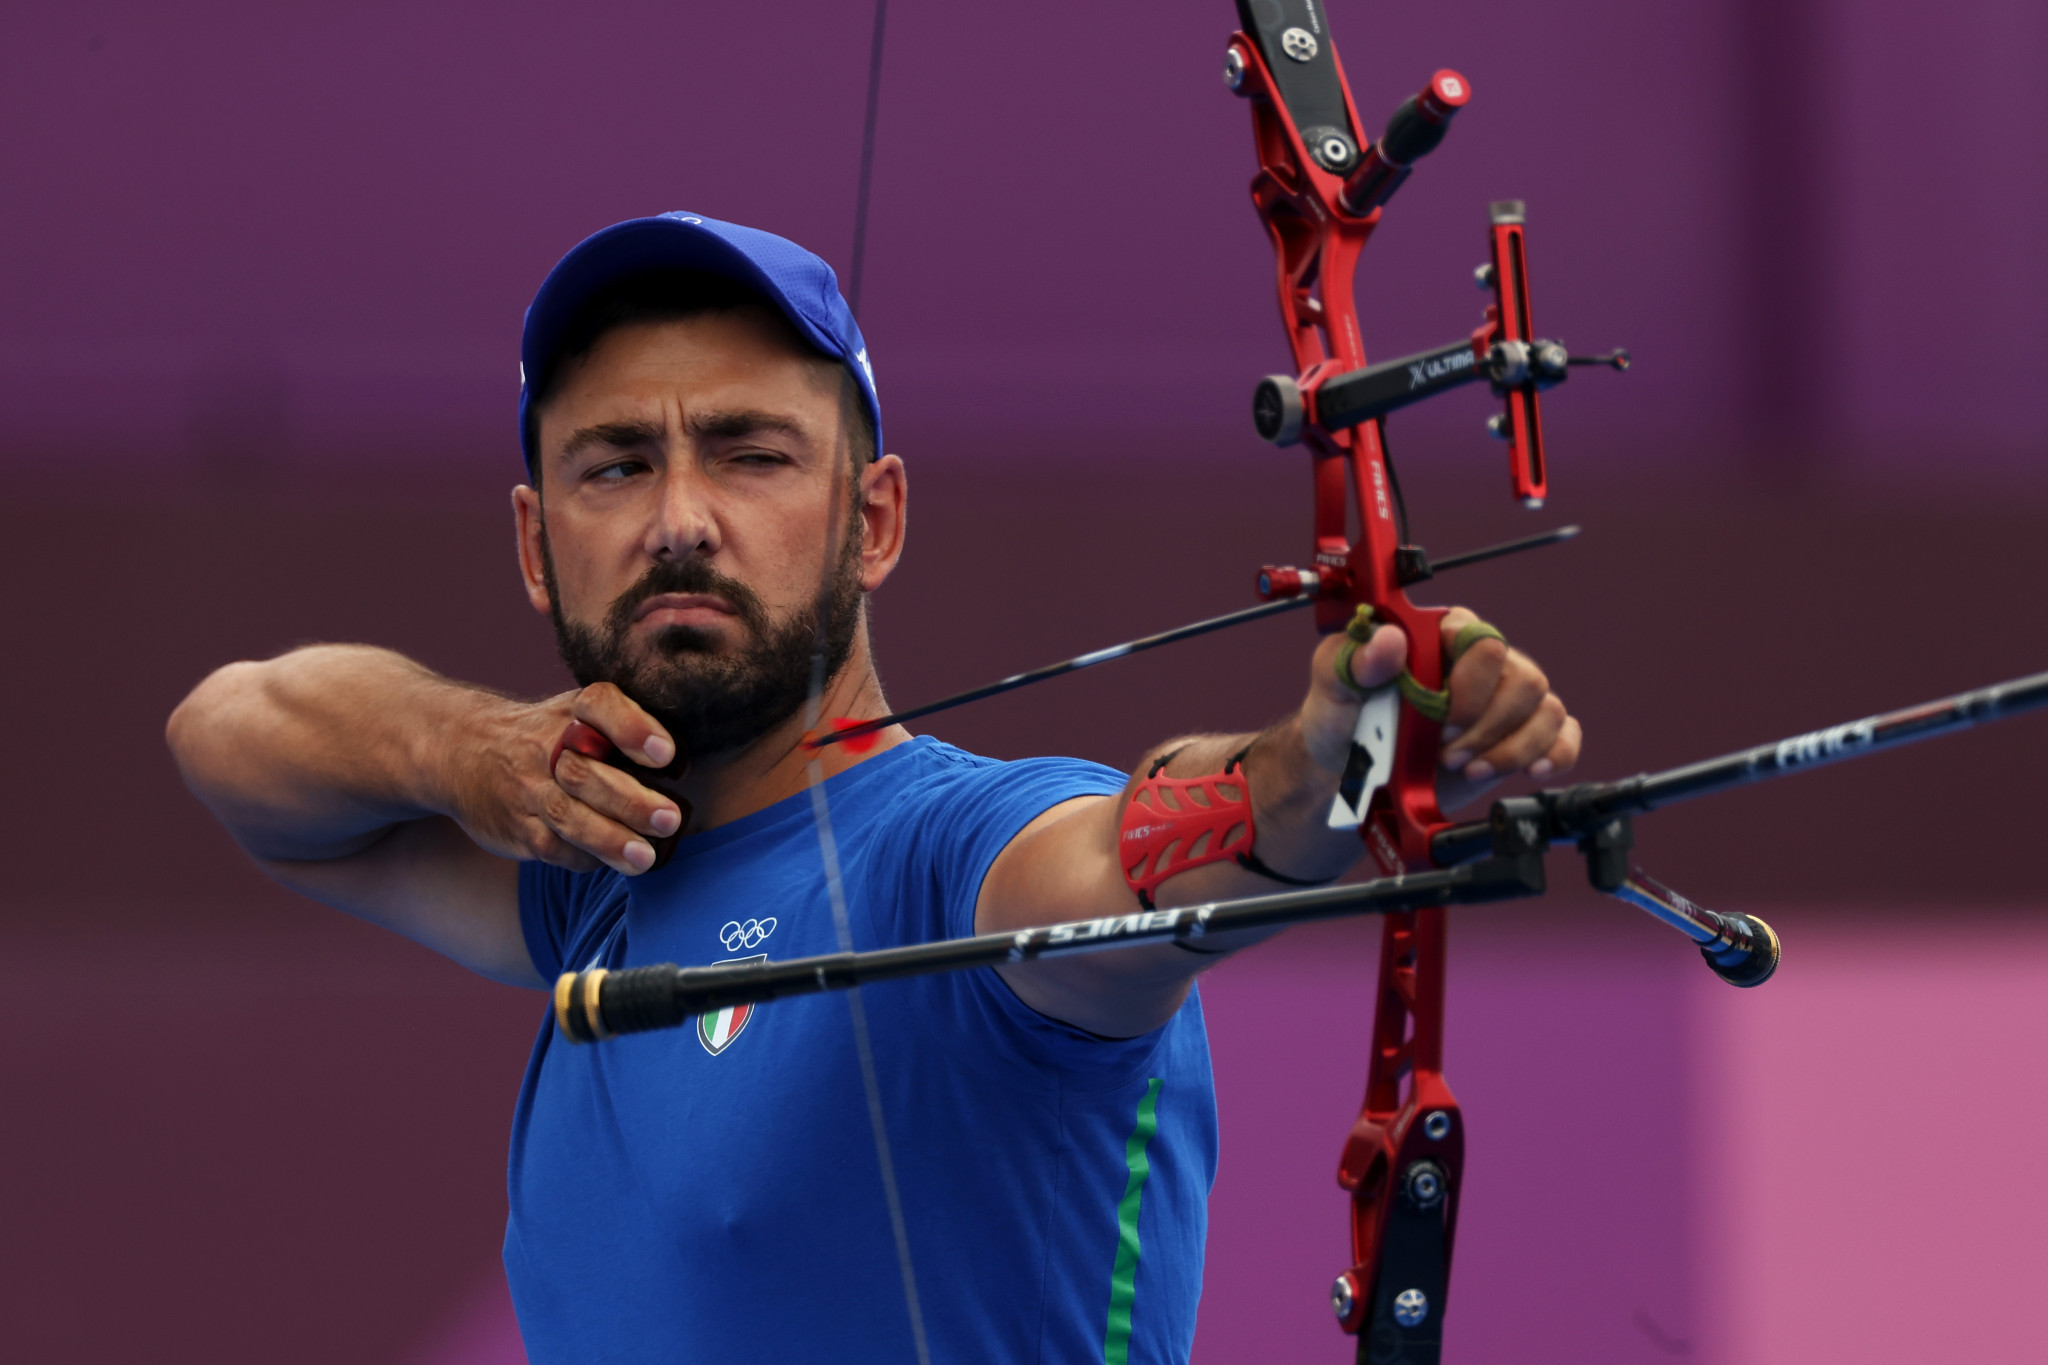 Tokyo 2020 Olympic silver medallist Mauro Nespoli of Italy was beaten by France's Clement Jacquey in the men's recurve quarter-finals ©Getty Images